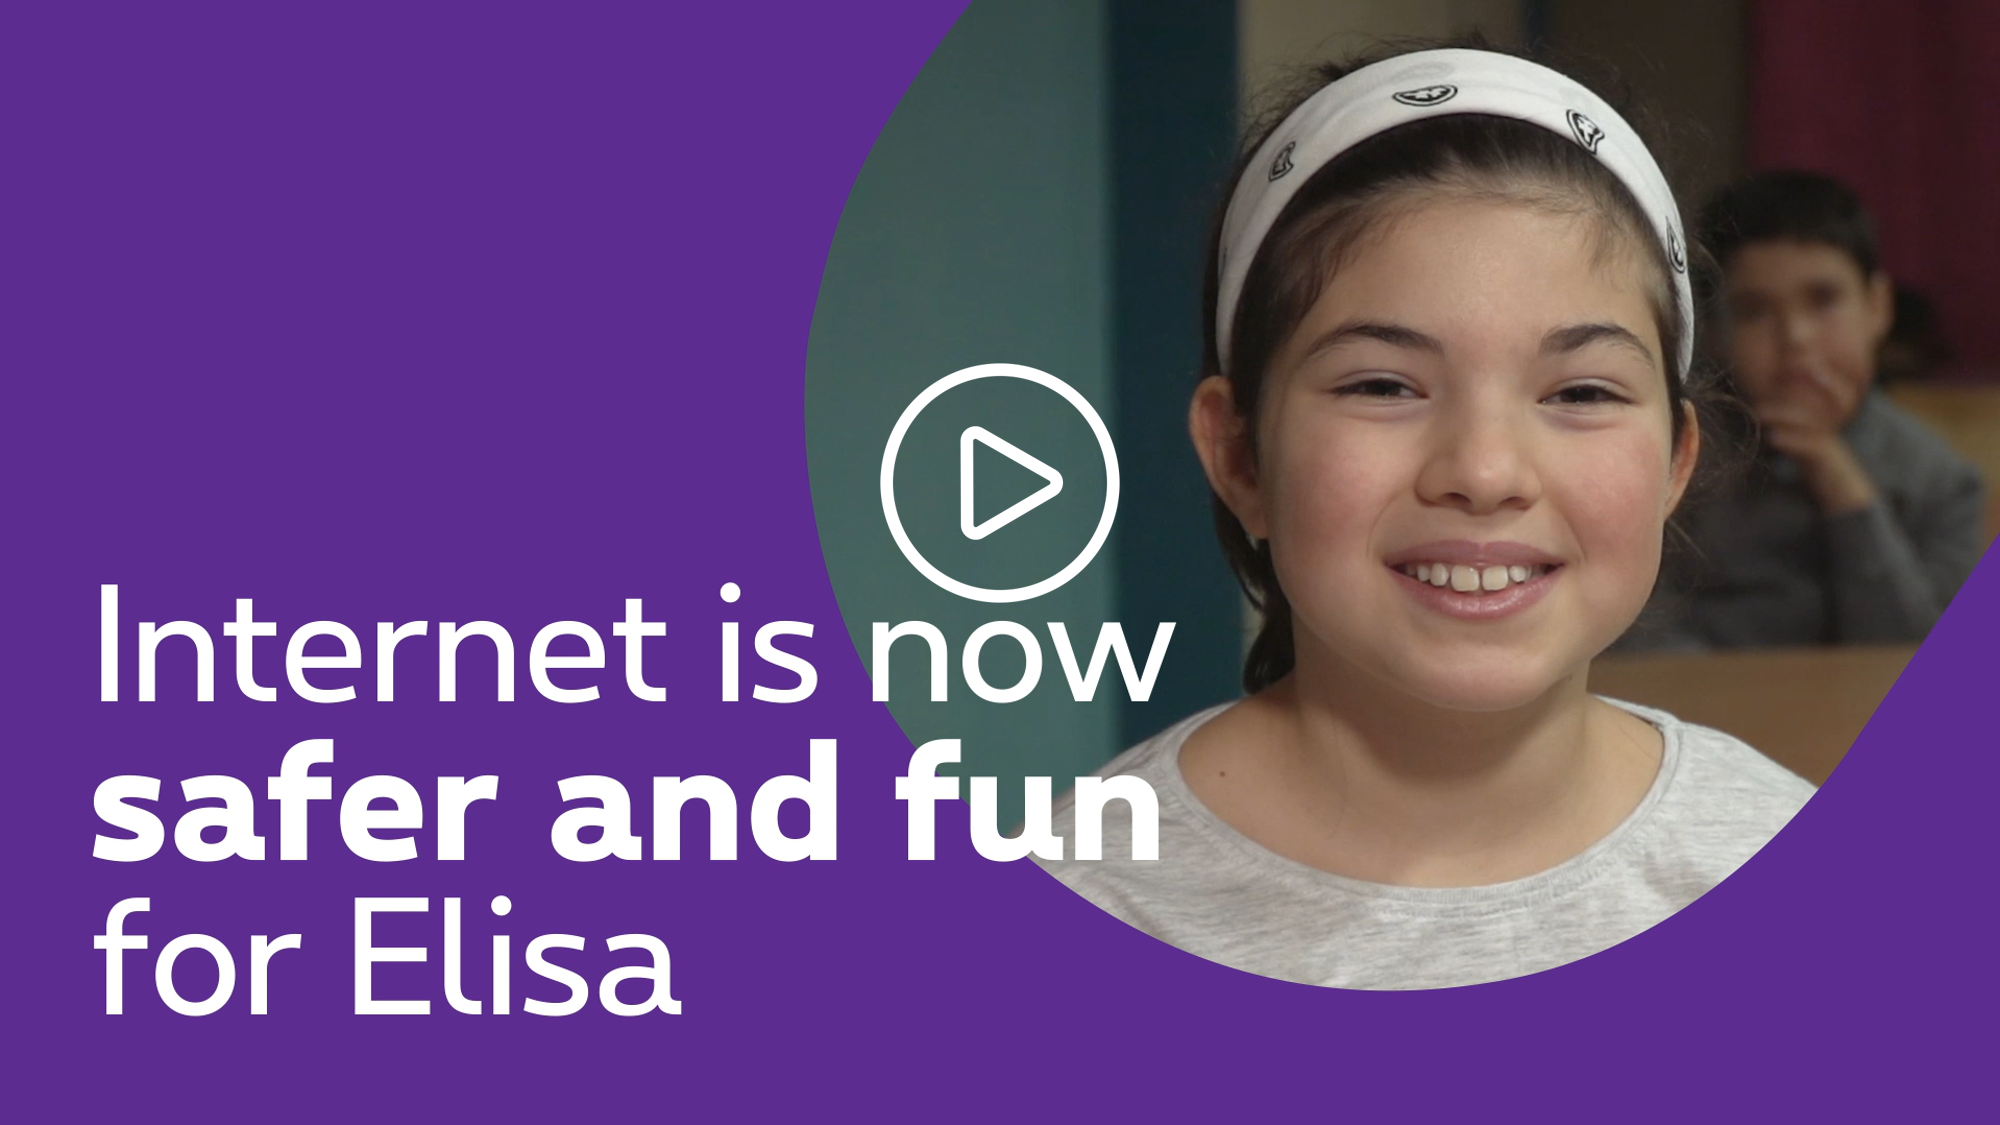 Internet is now safe and fun for Elisa - click to discover the video